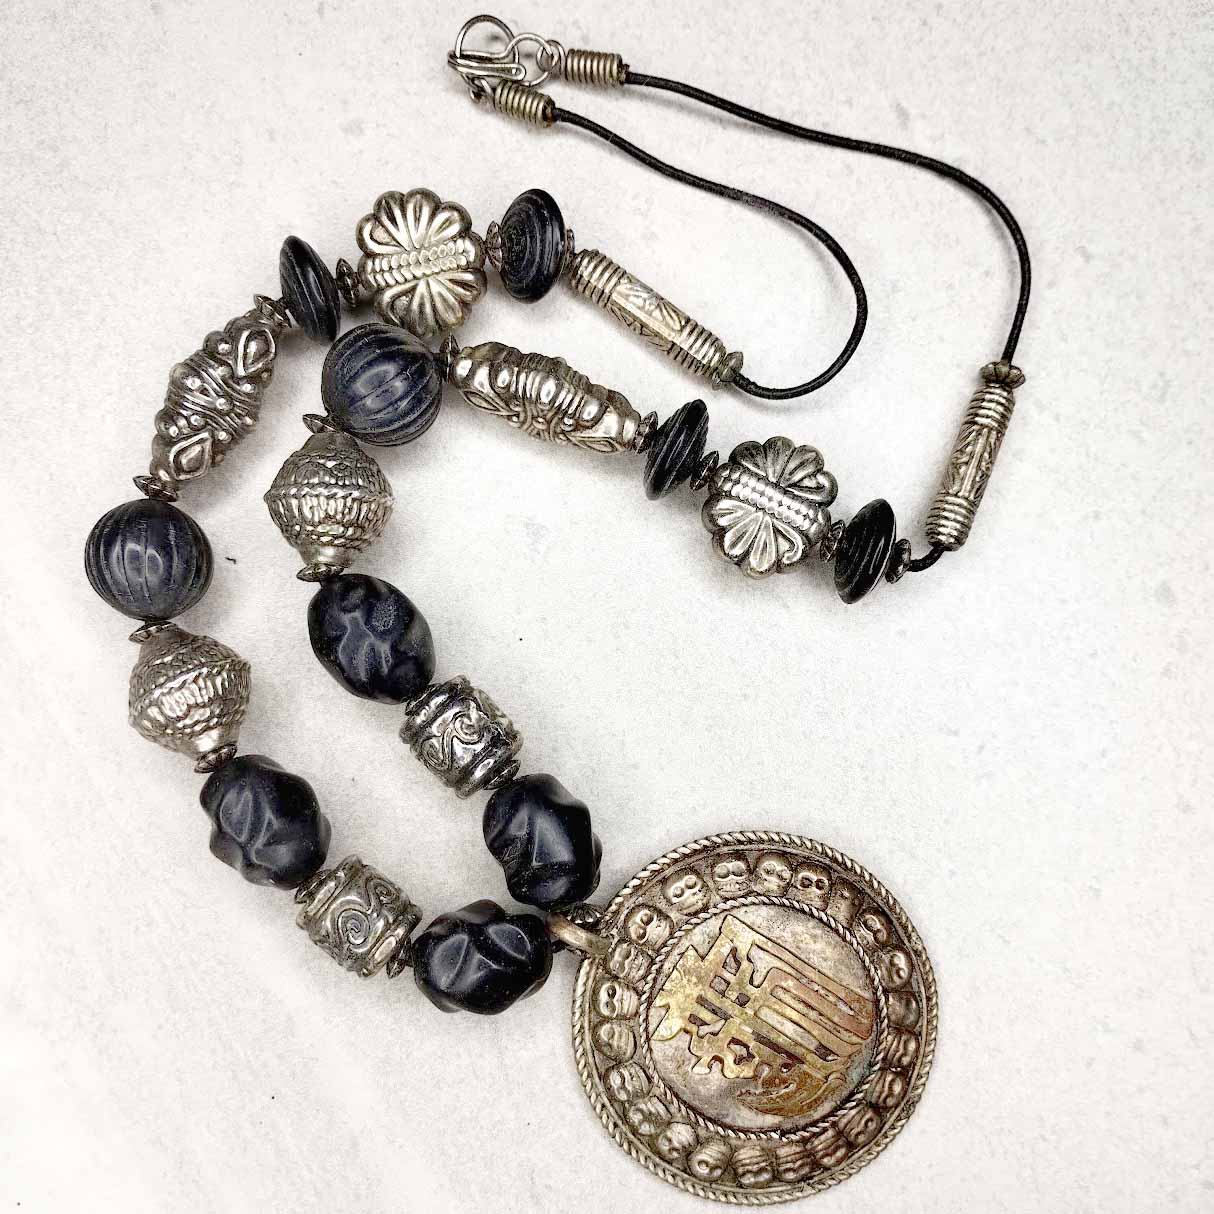 Antique-Look Pendant with Beads